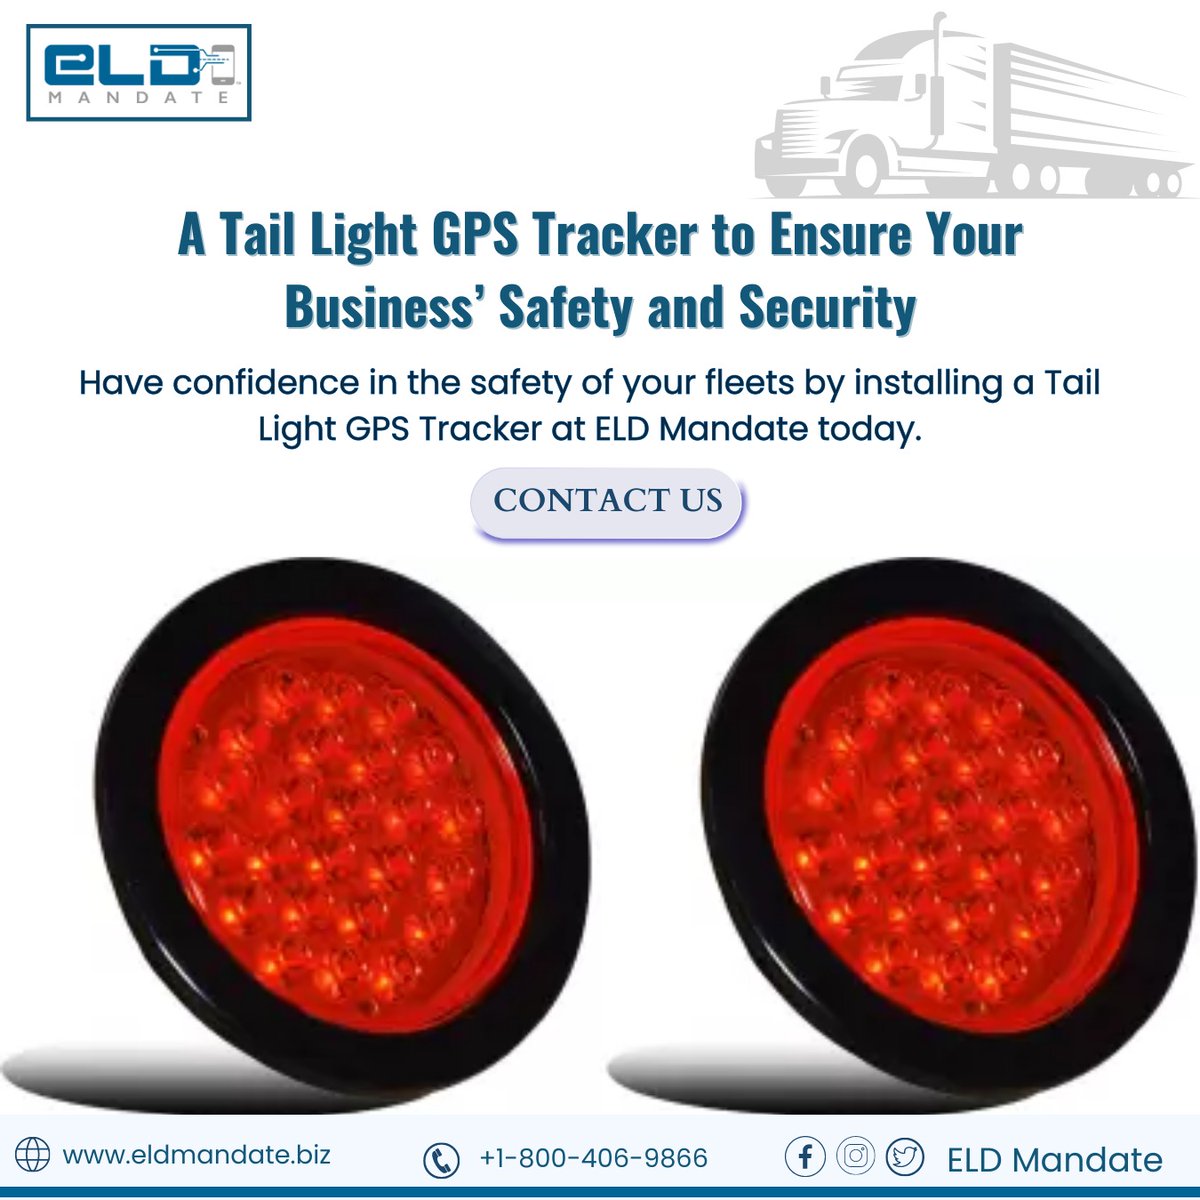 Safeguard your business with a Tail Light GPS Tracker! Boost confidence in fleet safety and security by installing one at #ELDMandate today.
 Visit us: eldmandate.biz  
Call Us: +1-800-406-9866
#TruckingRevolution #GPSMonitoring #TailLightTrackers #ThisisFine #USA #Truck